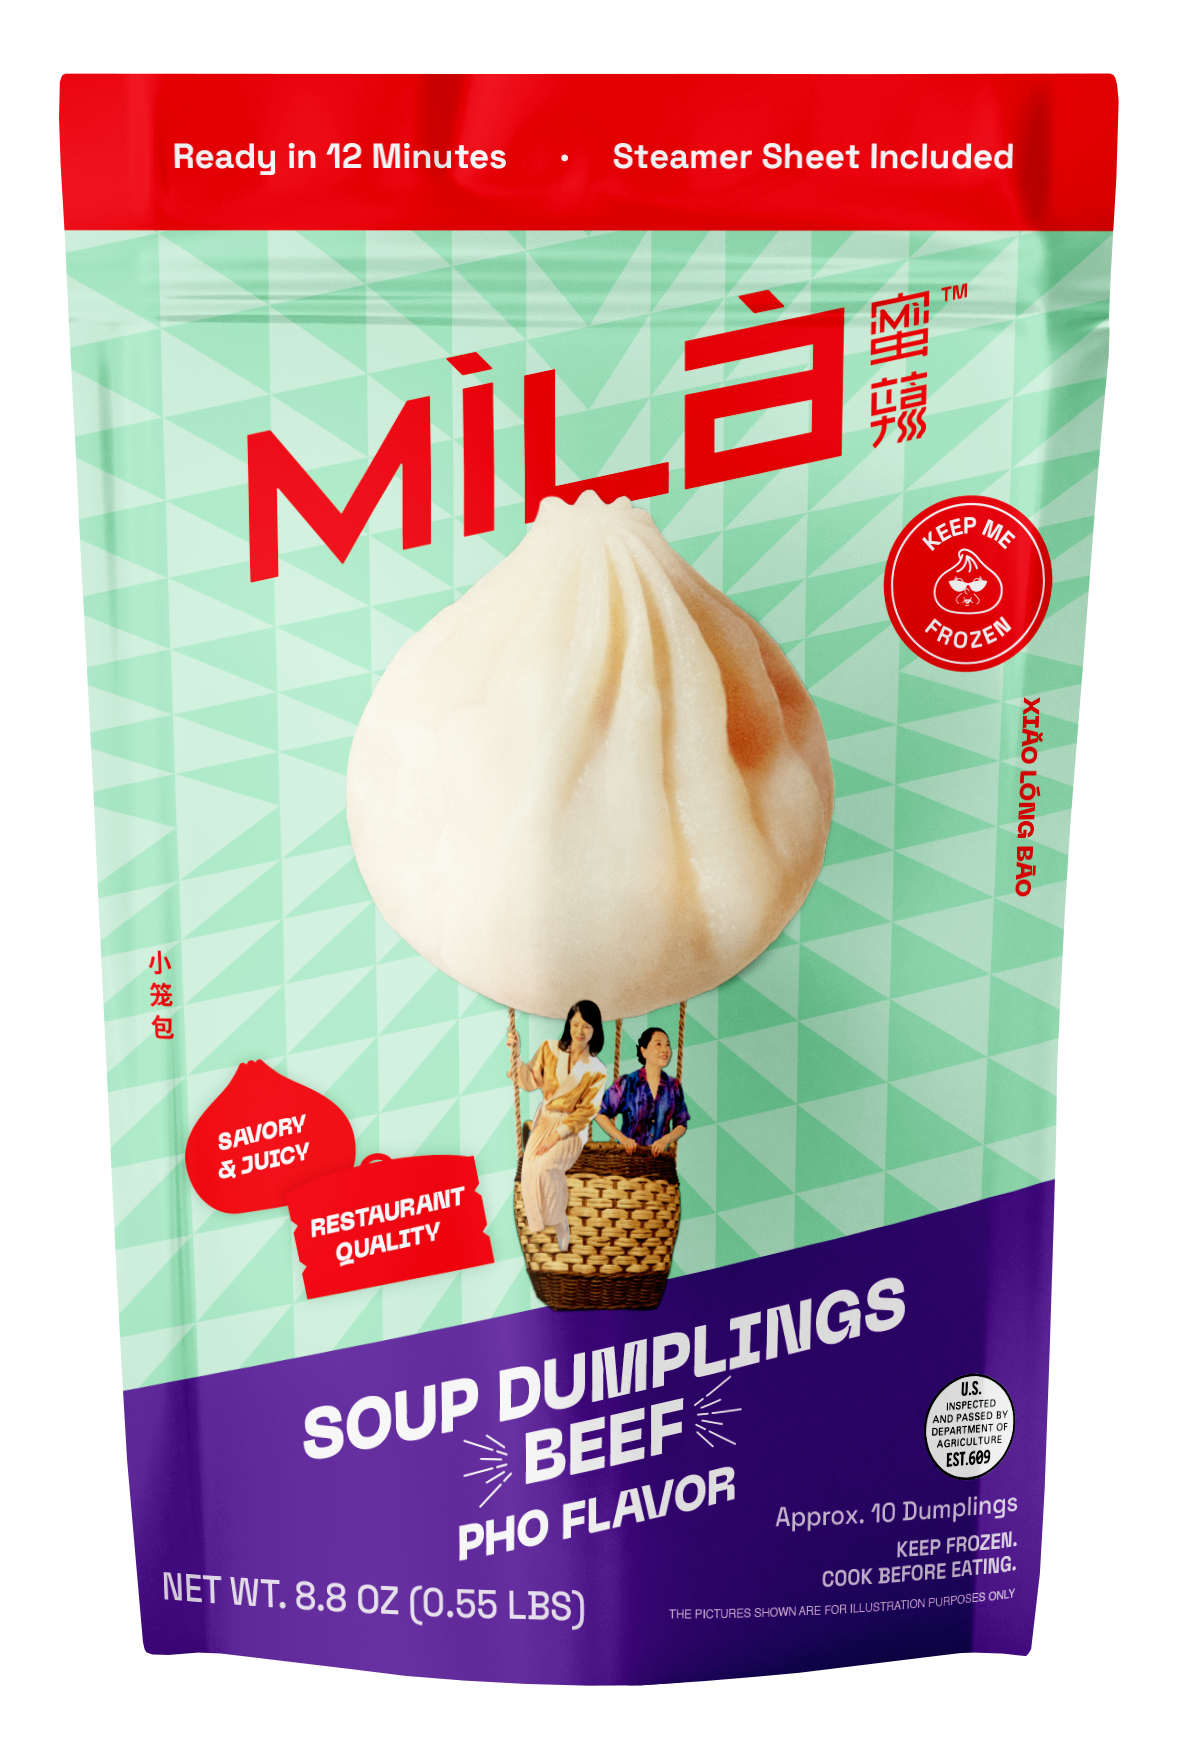 MìLà To Showcase Viral Soup Dumplings & Debut New Flavor At Expo West